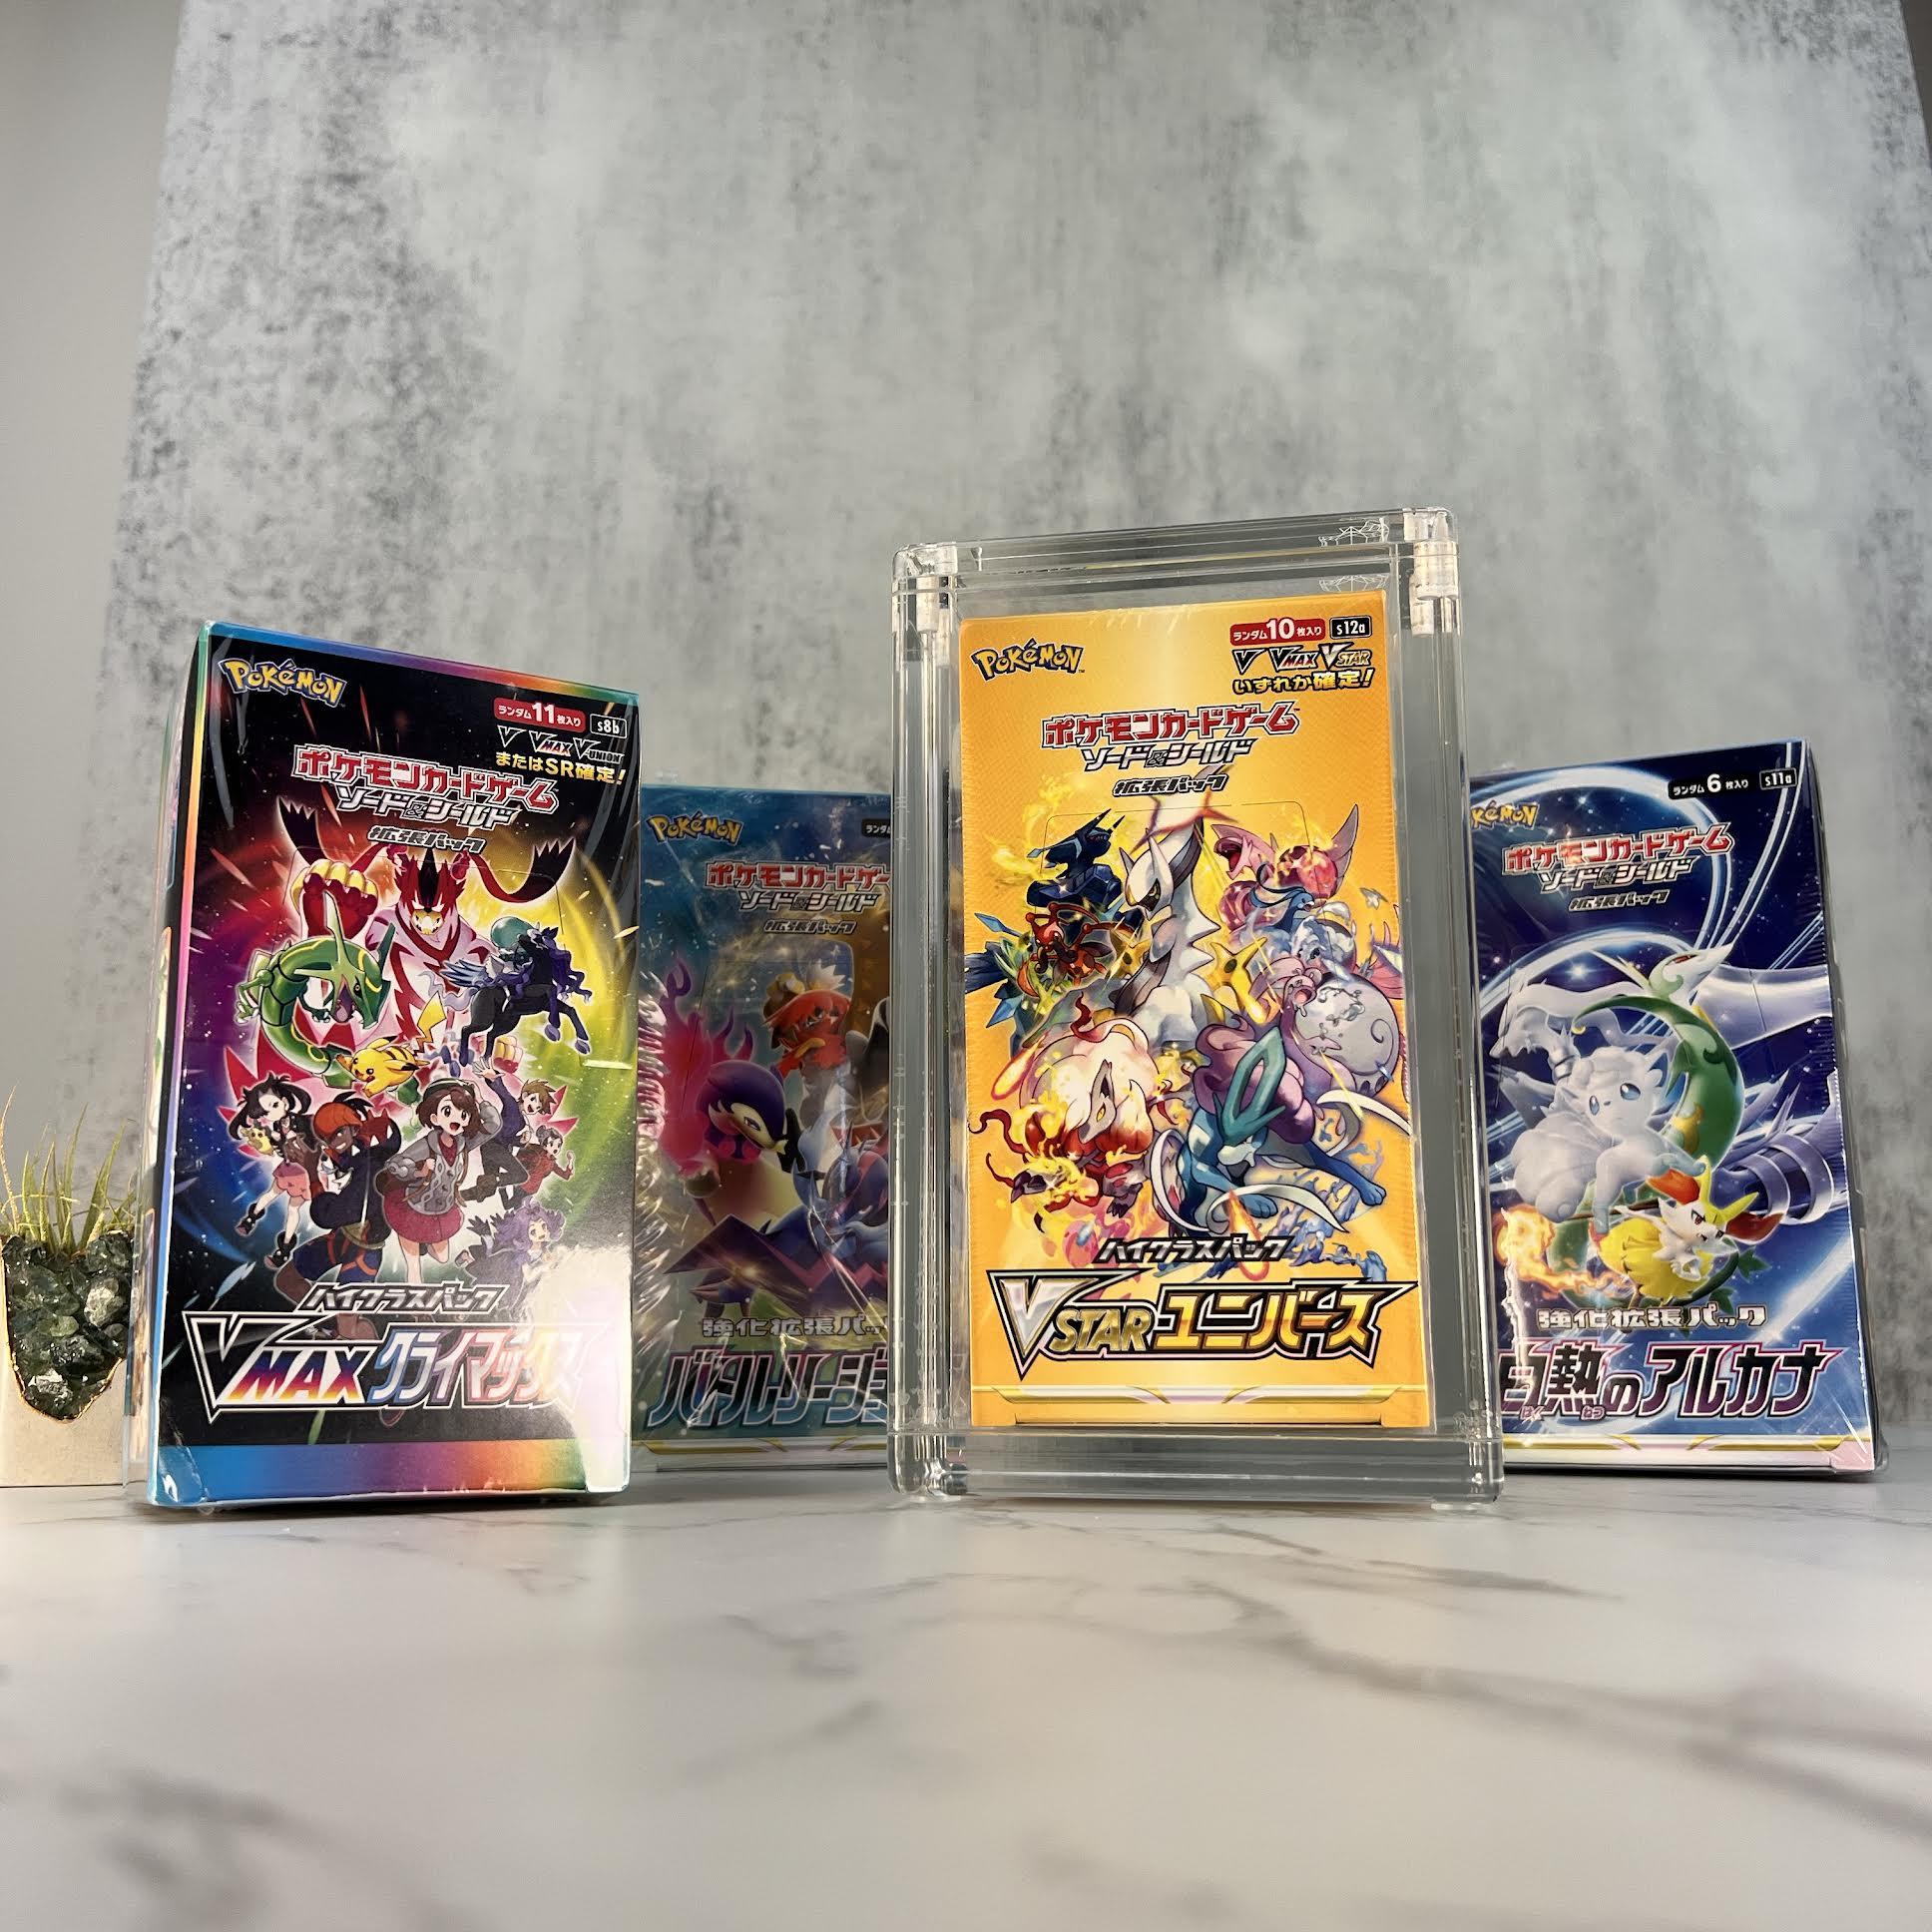 Ultra clear Pokemon Japanese booster box magnetic acrylic protective case, with crystal acrylic, with 99.6% UV protection against sun damage and fading. Fits Sword & Shield High Class, VMAX Climax Booster Box, VSTAR Universe, and more.